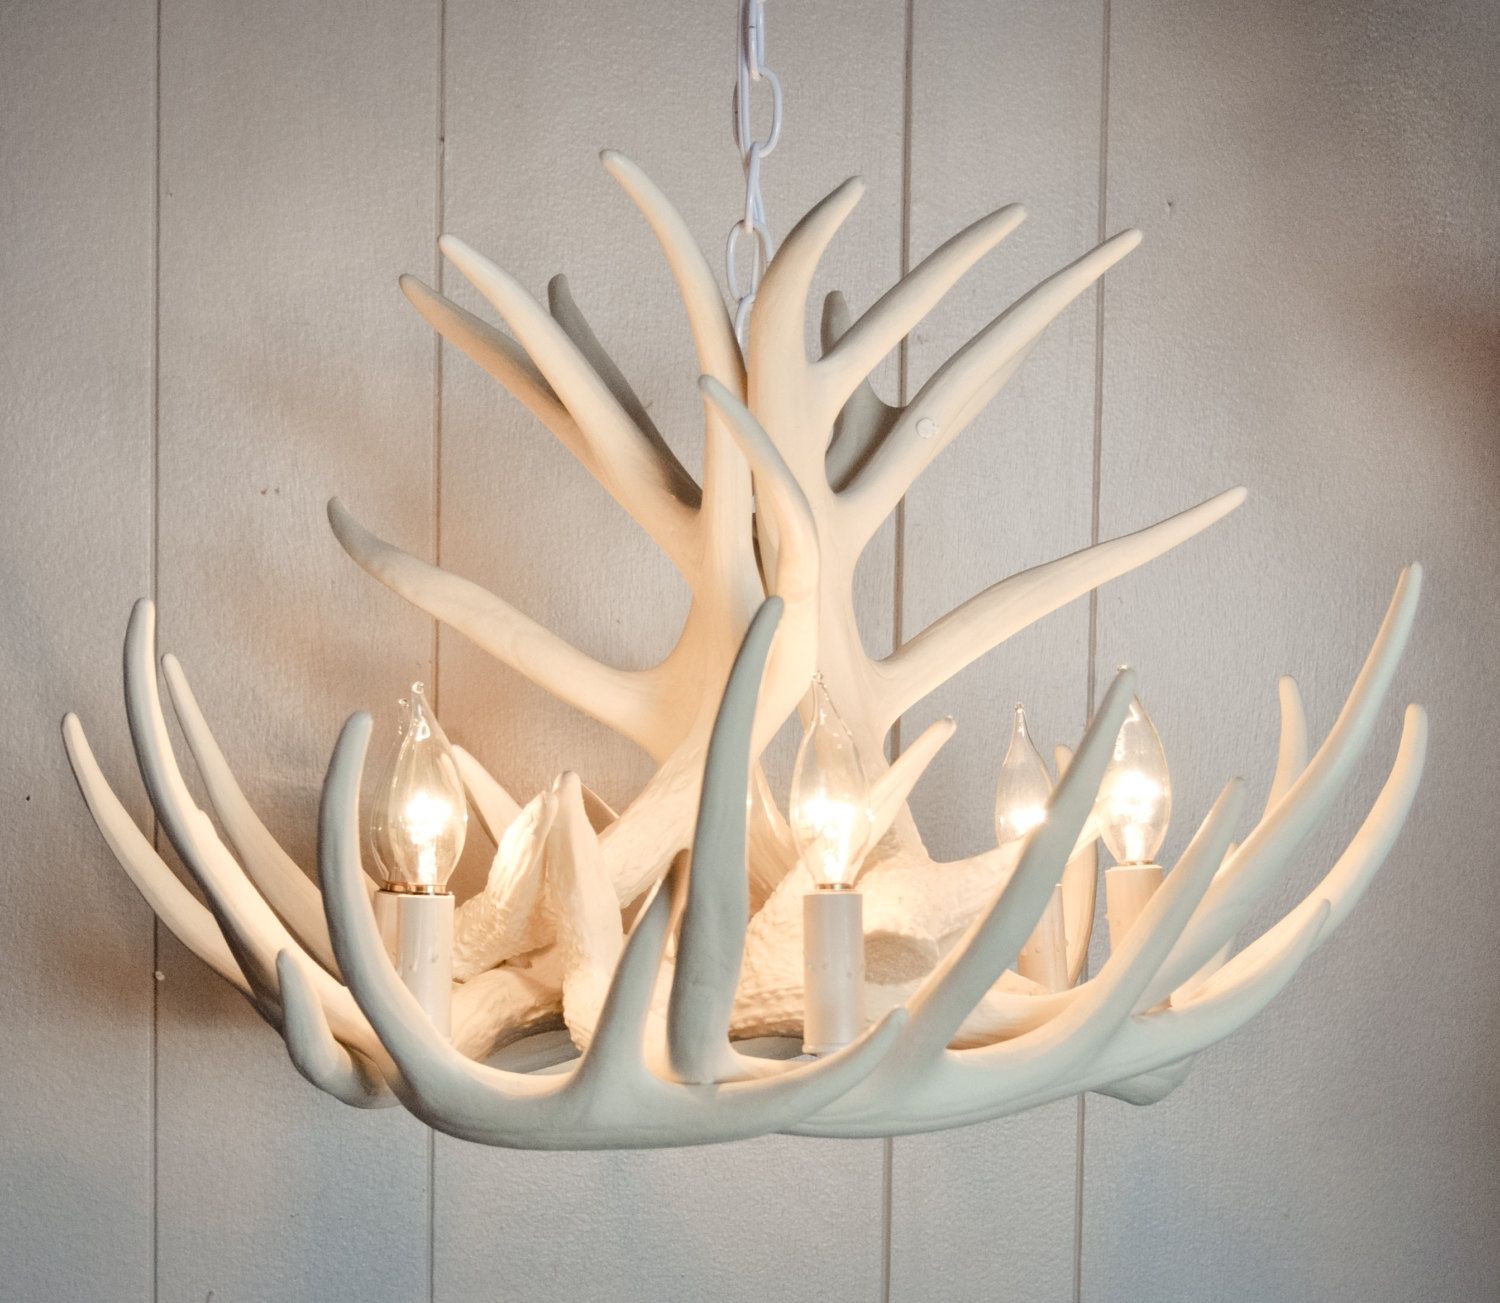 Lamp Deer Horn Chandelier With Authentic Look For Your Lighting Throughout Stag Horn Chandelier (View 4 of 12)